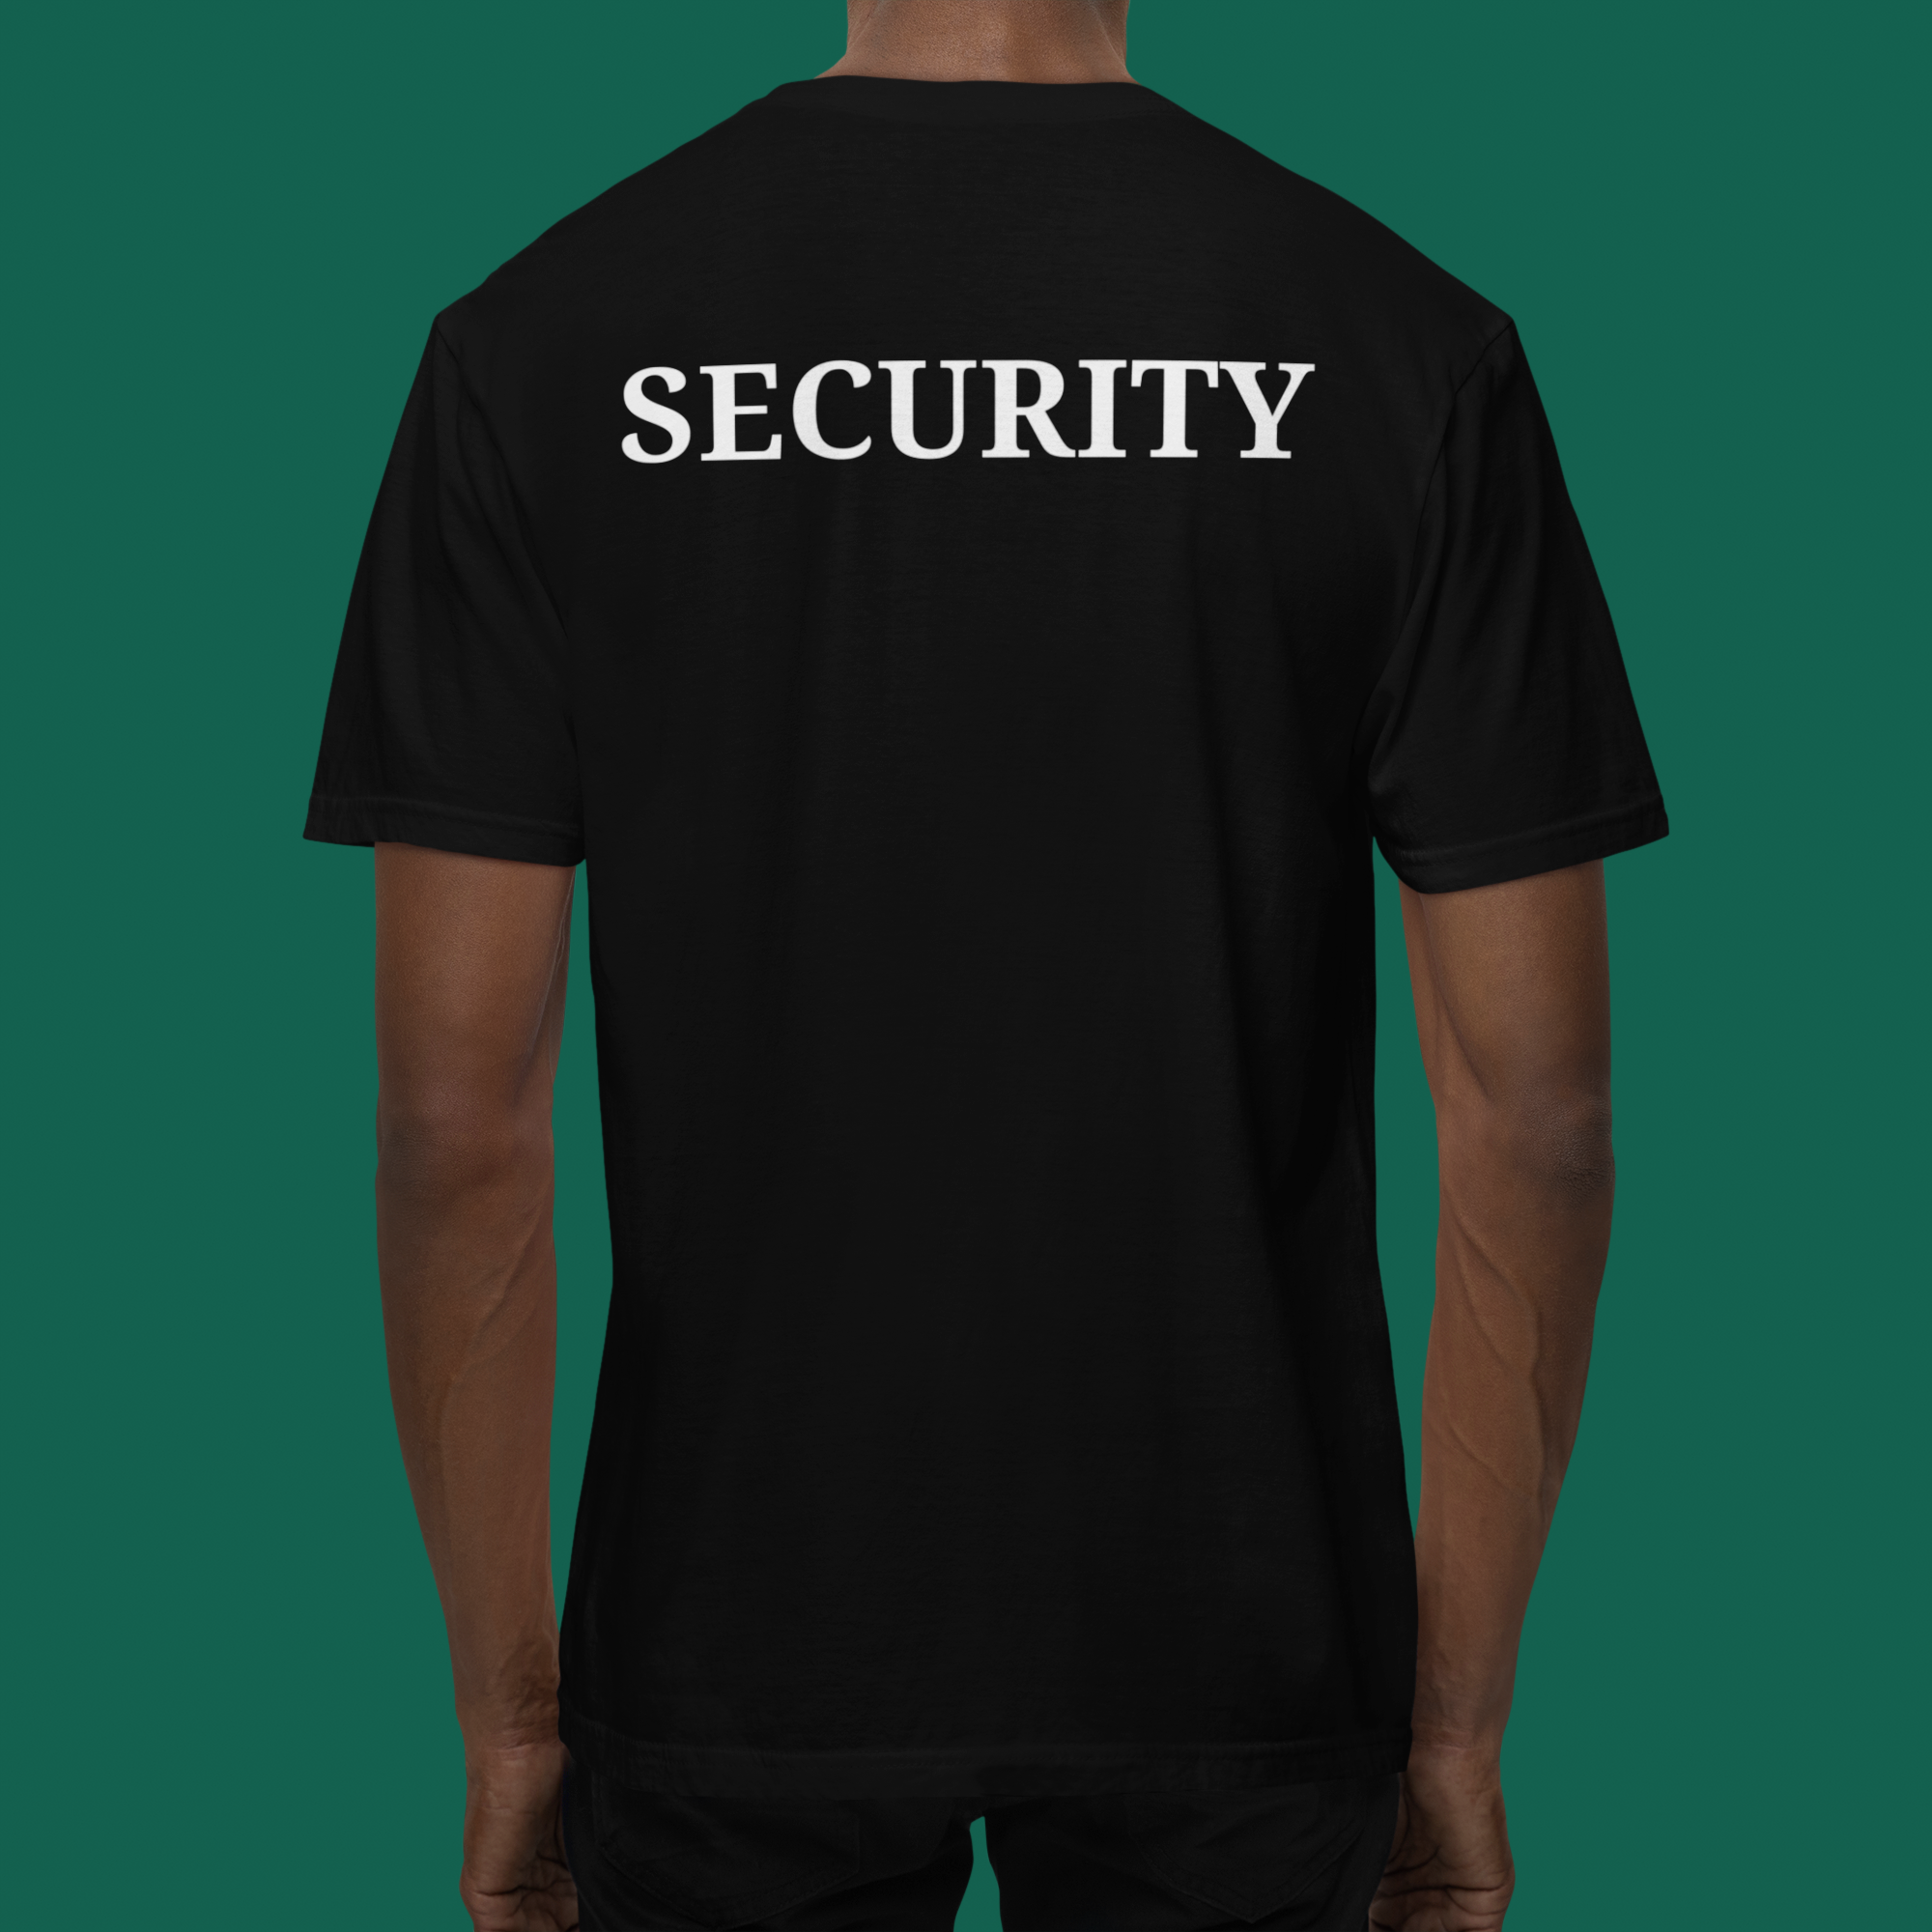 KW Crafted Solutions custom security shirt for venue apparel